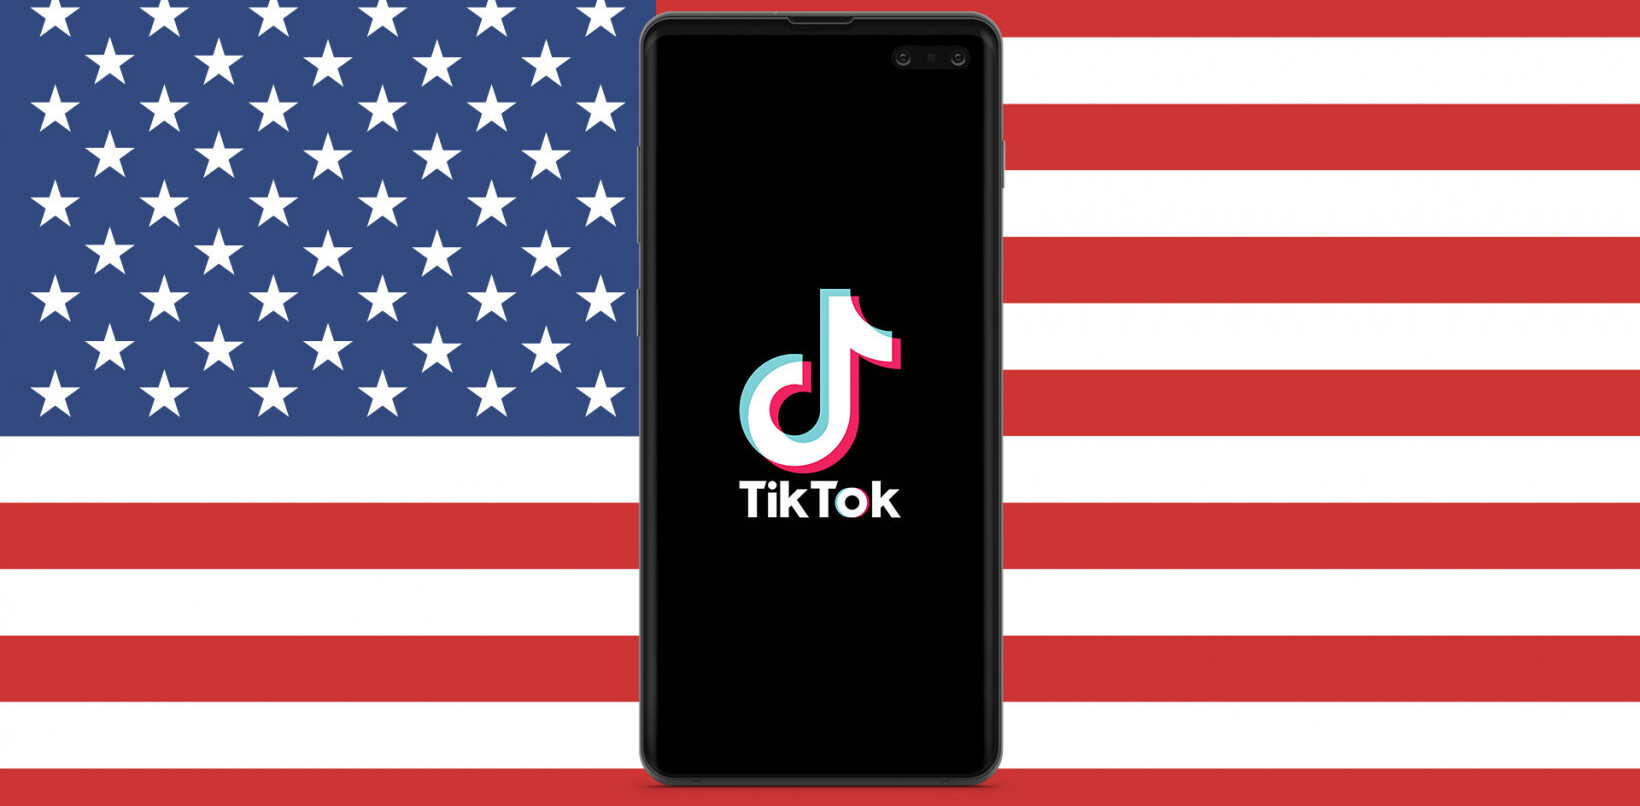 TikTok isn’t getting banned from US app stores just yet